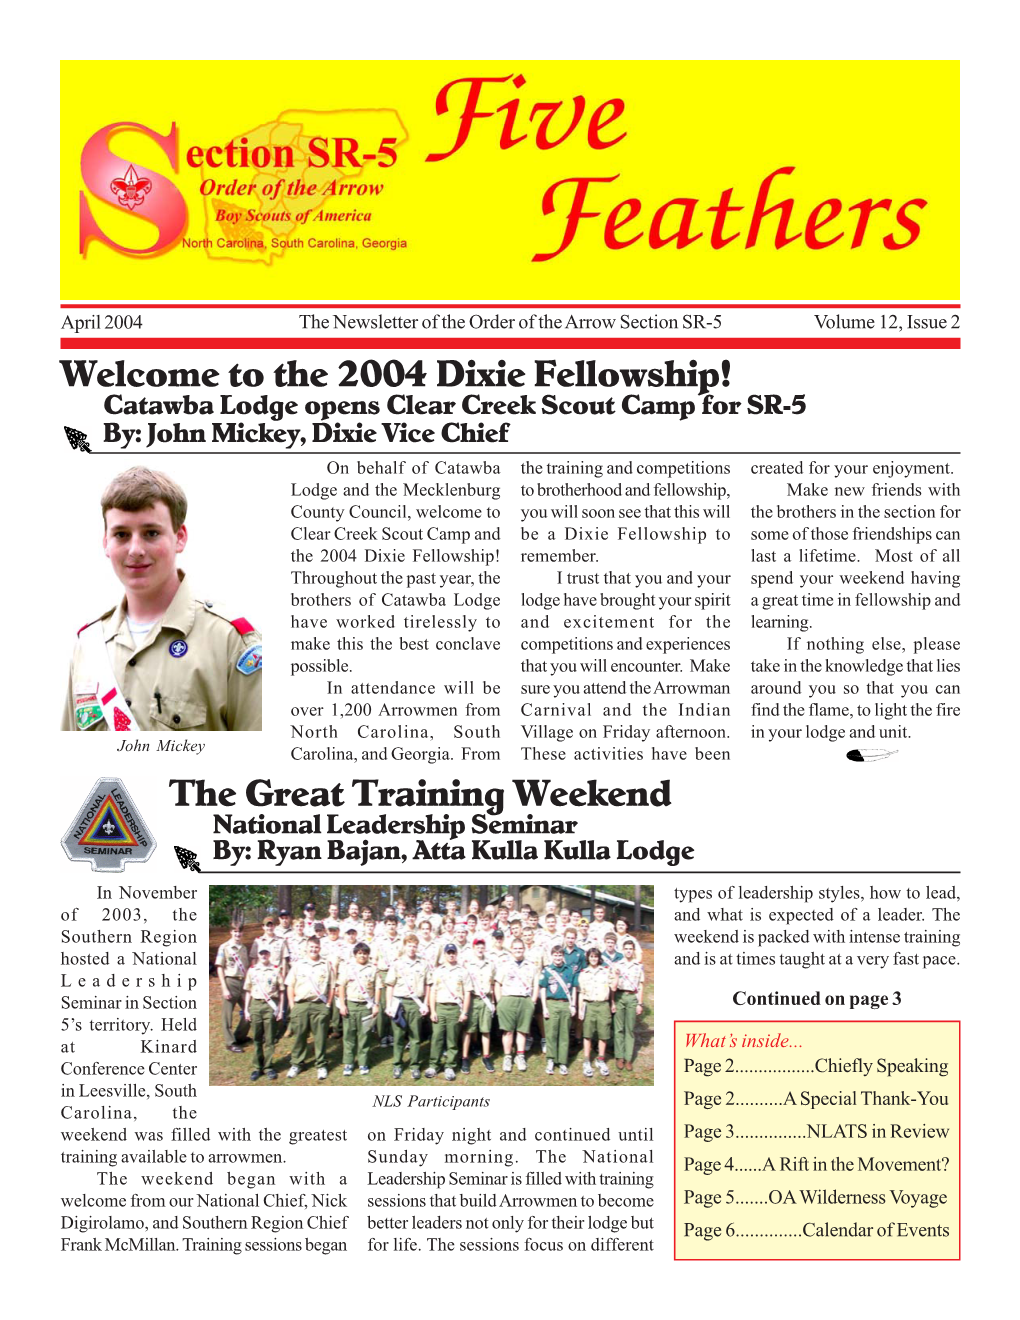 Five Feathers Version 12 Issue 2